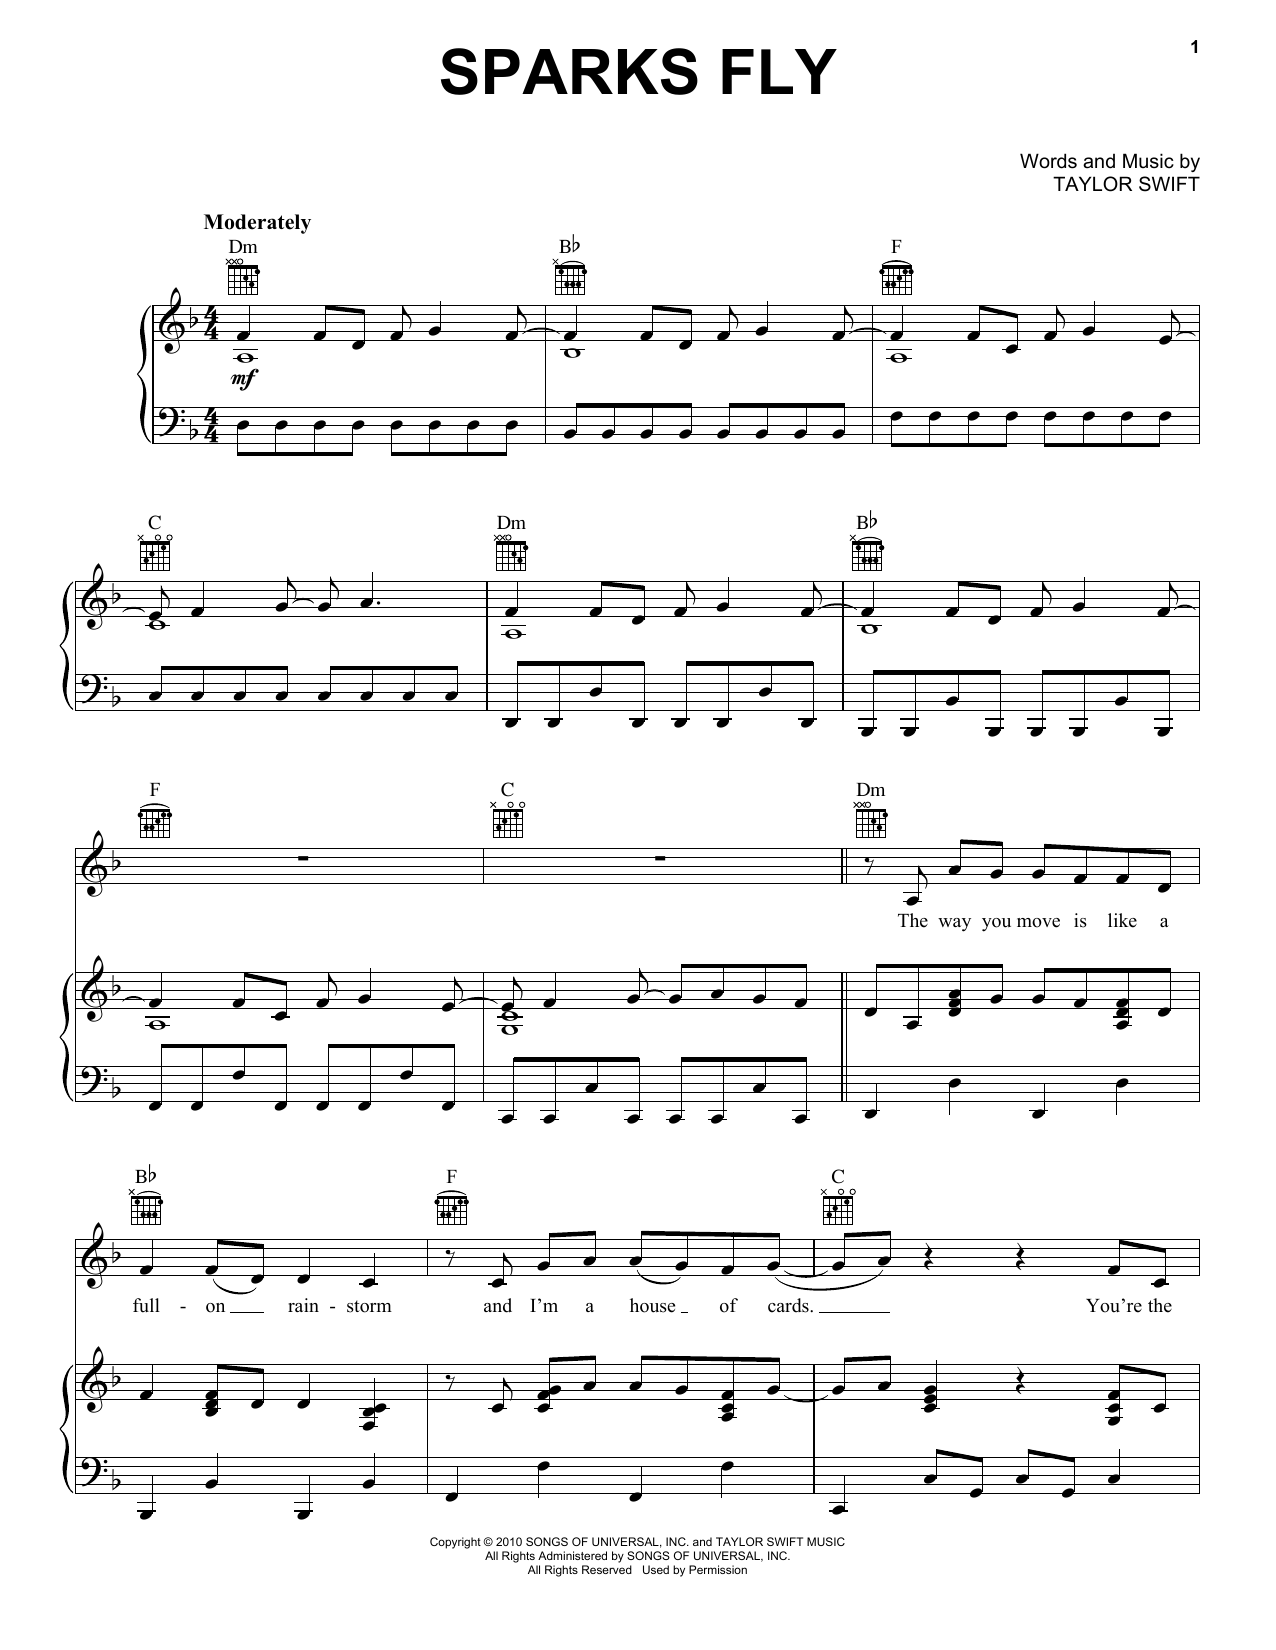 Taylor Swift Sparks Fly sheet music preview music notes and score for Piano, Vocal & Guitar (Right-Hand Melody) including 9 page(s)